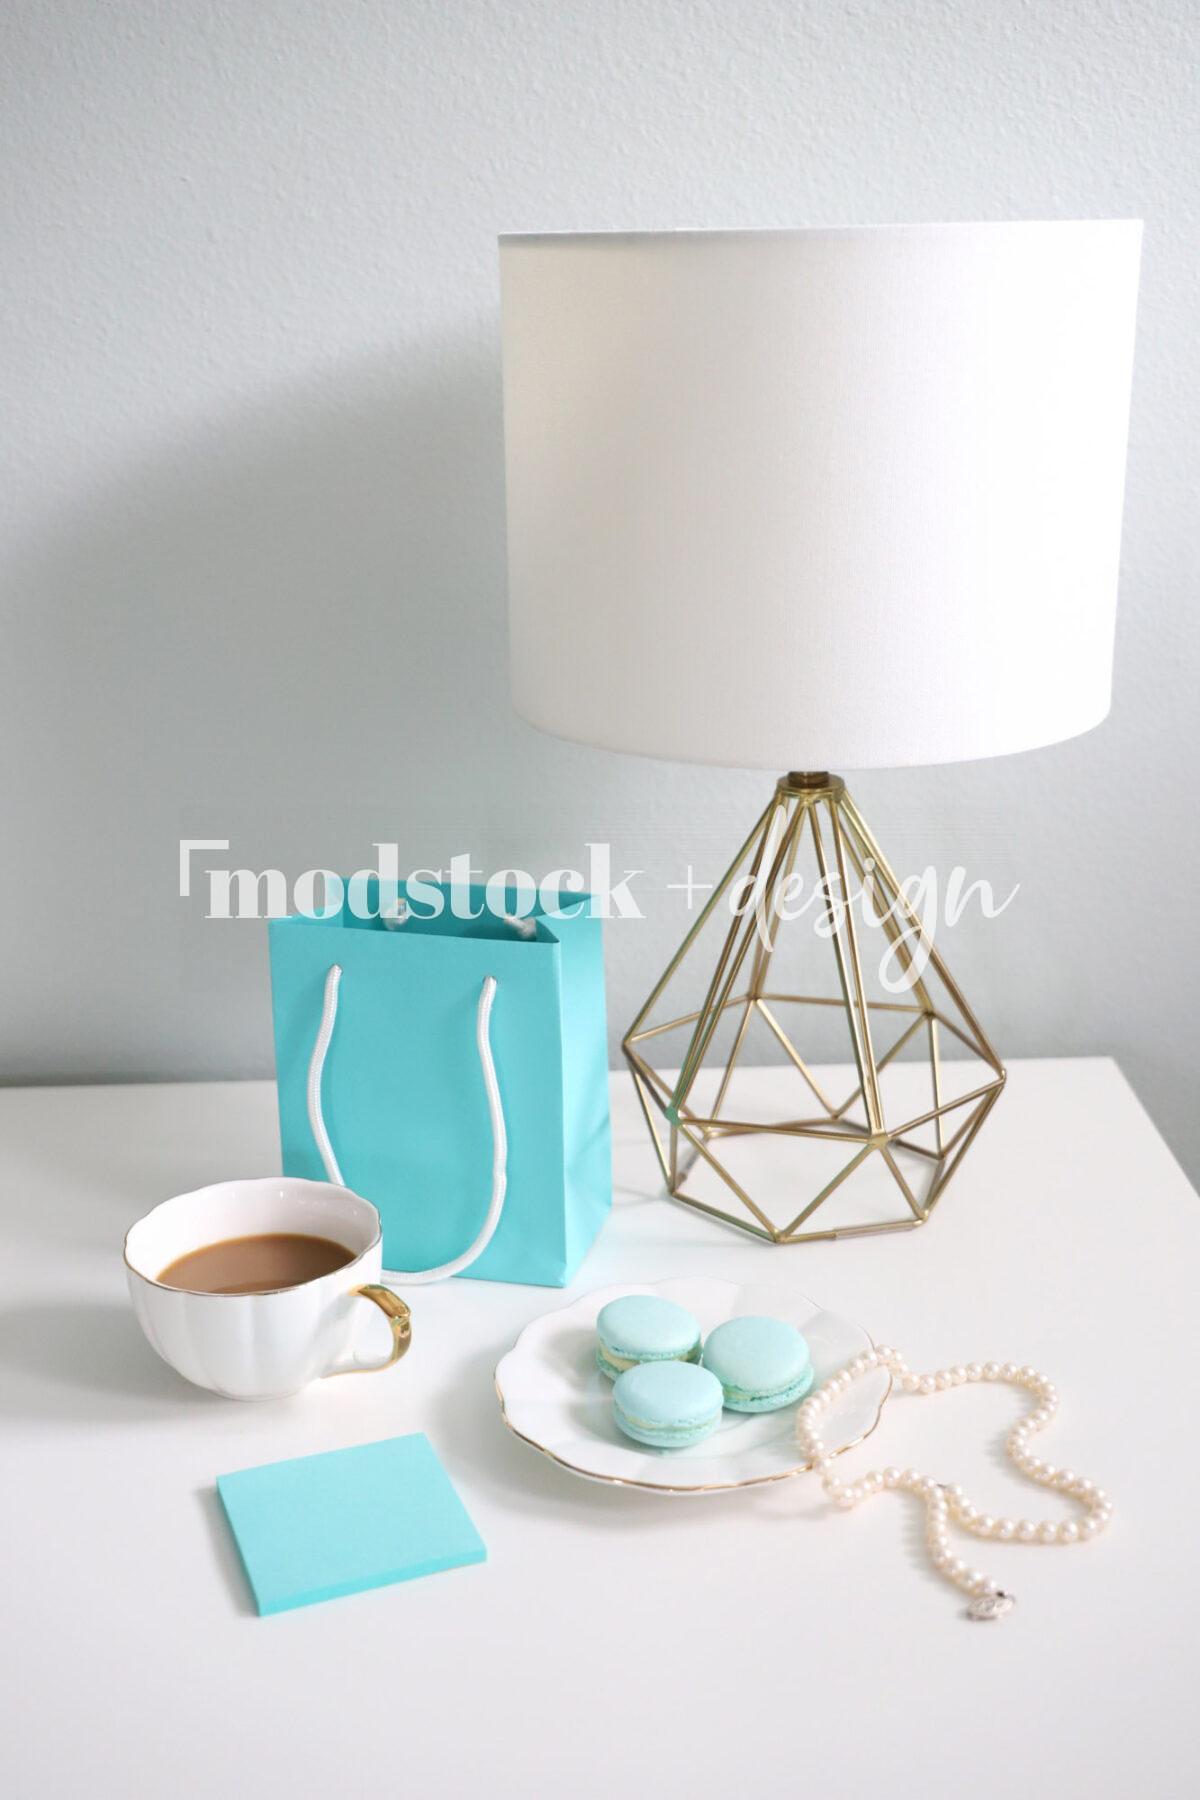 Modstock Luxe Teal Workspace - Gold 25